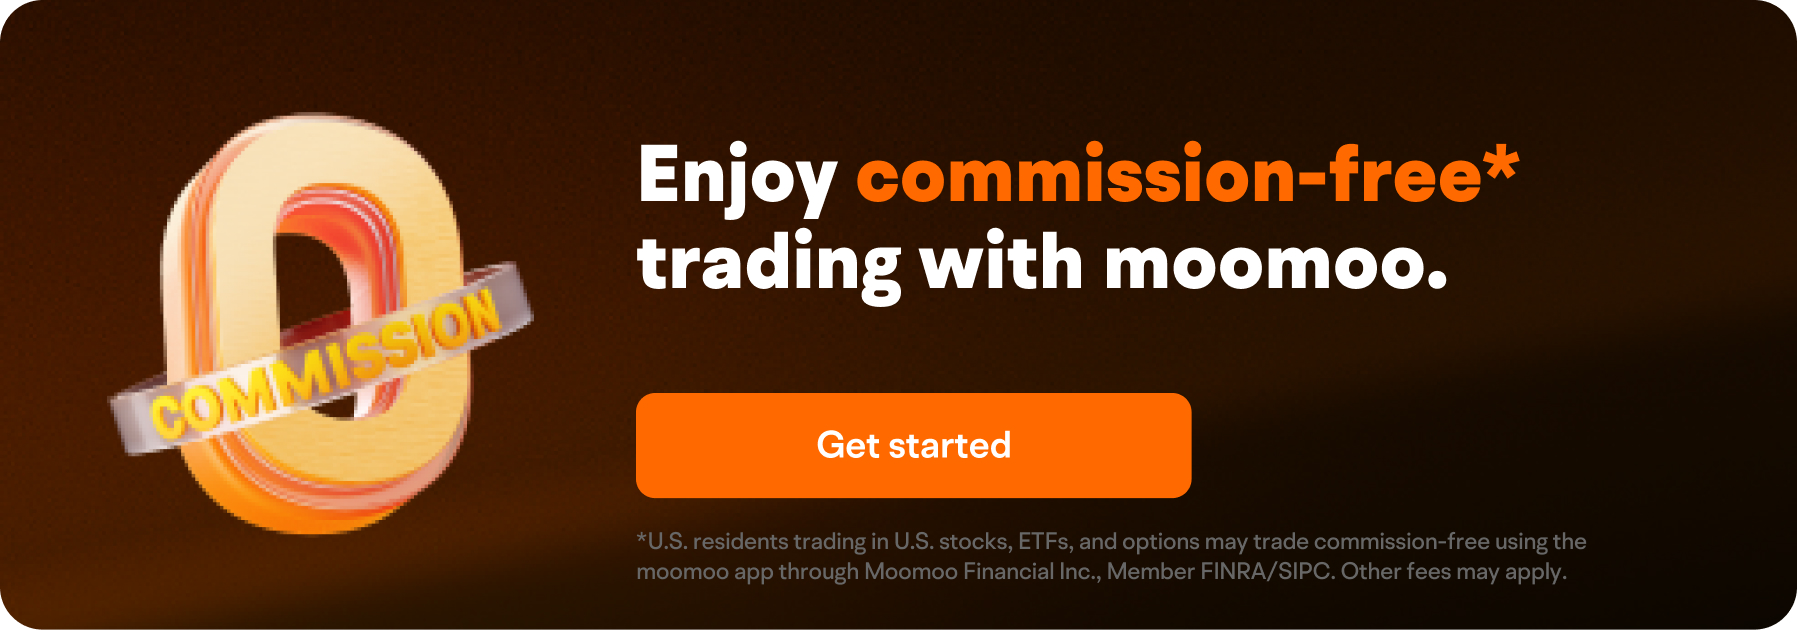 commission-free trading with moomoo